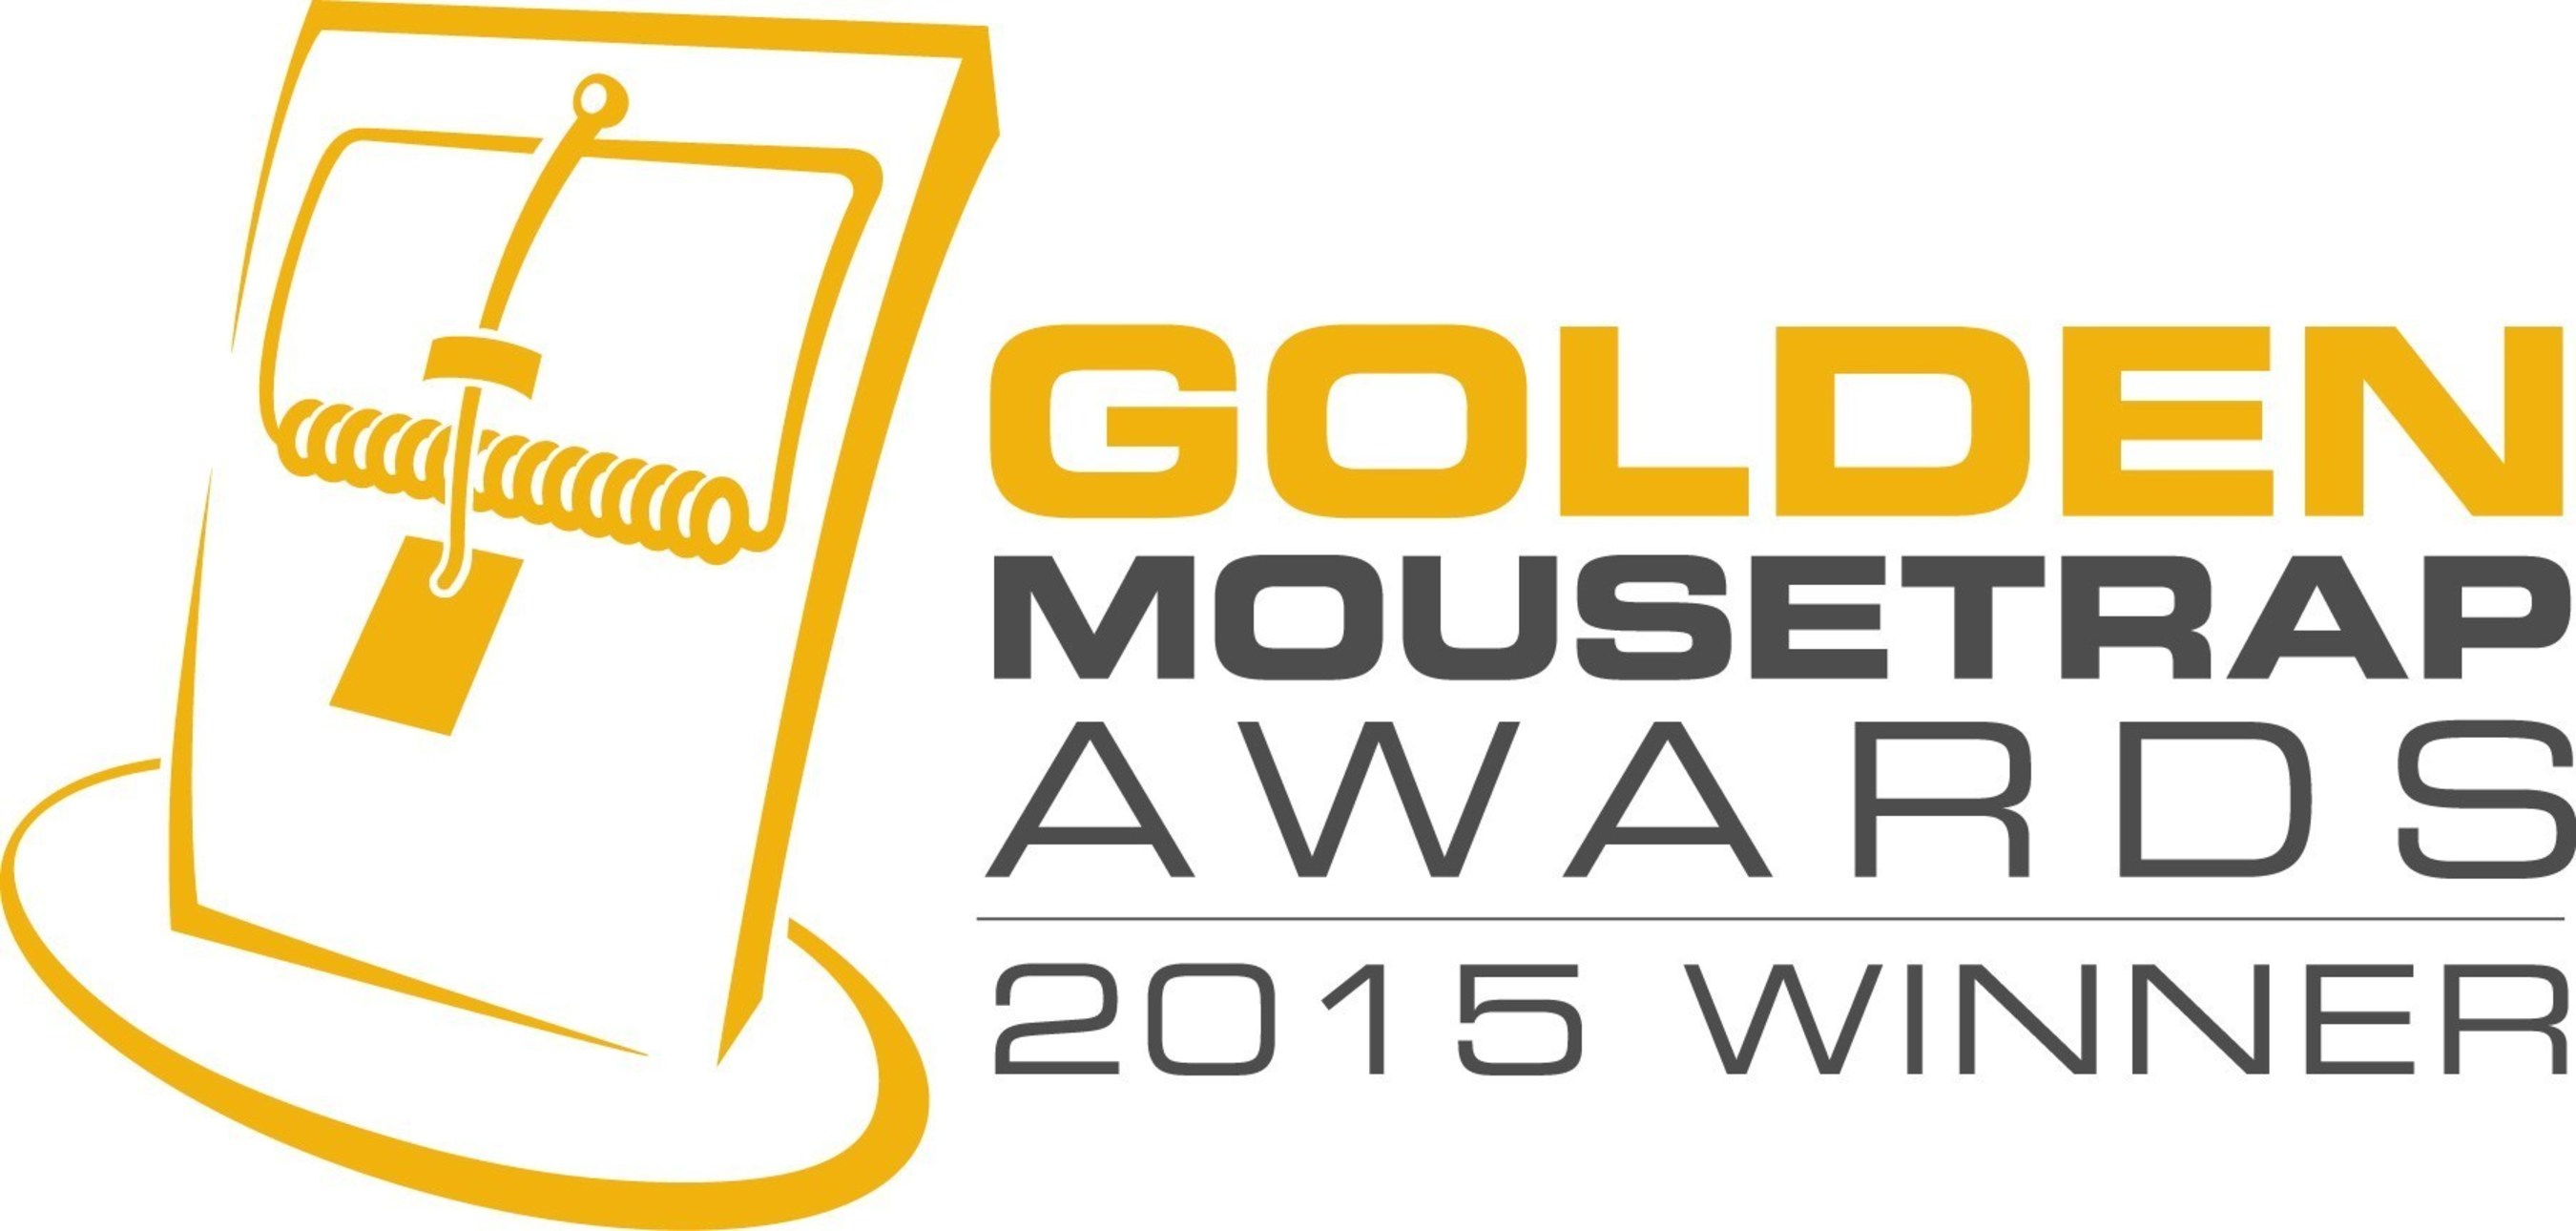 The Golden Mousetrap Awards is a program that celebrates the companies, products, and people who are energizing North American design, engineering, and manufacturing.